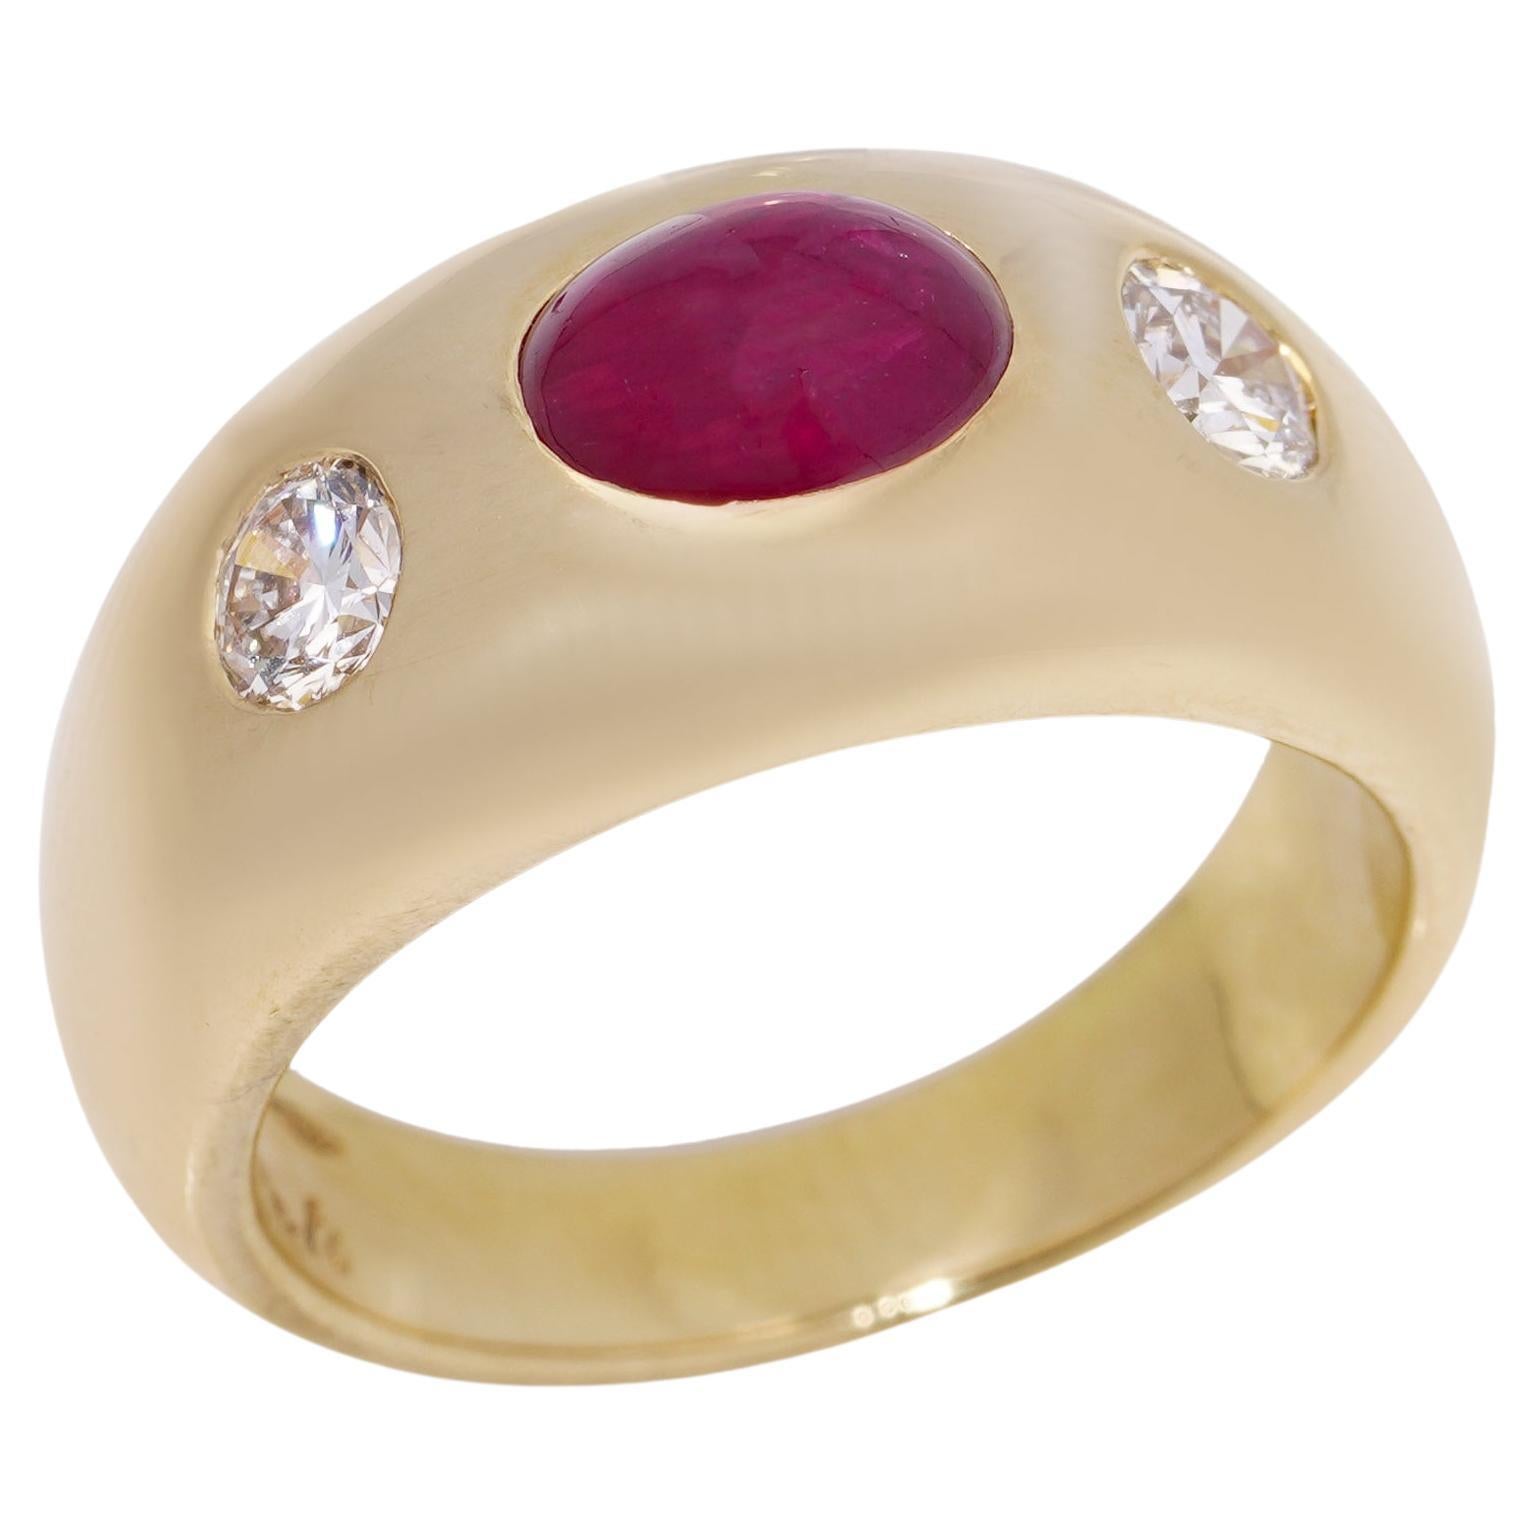 Bvlgari 18kt. gold three - stone Burma Cabochon ruby and diamond ring For Sale